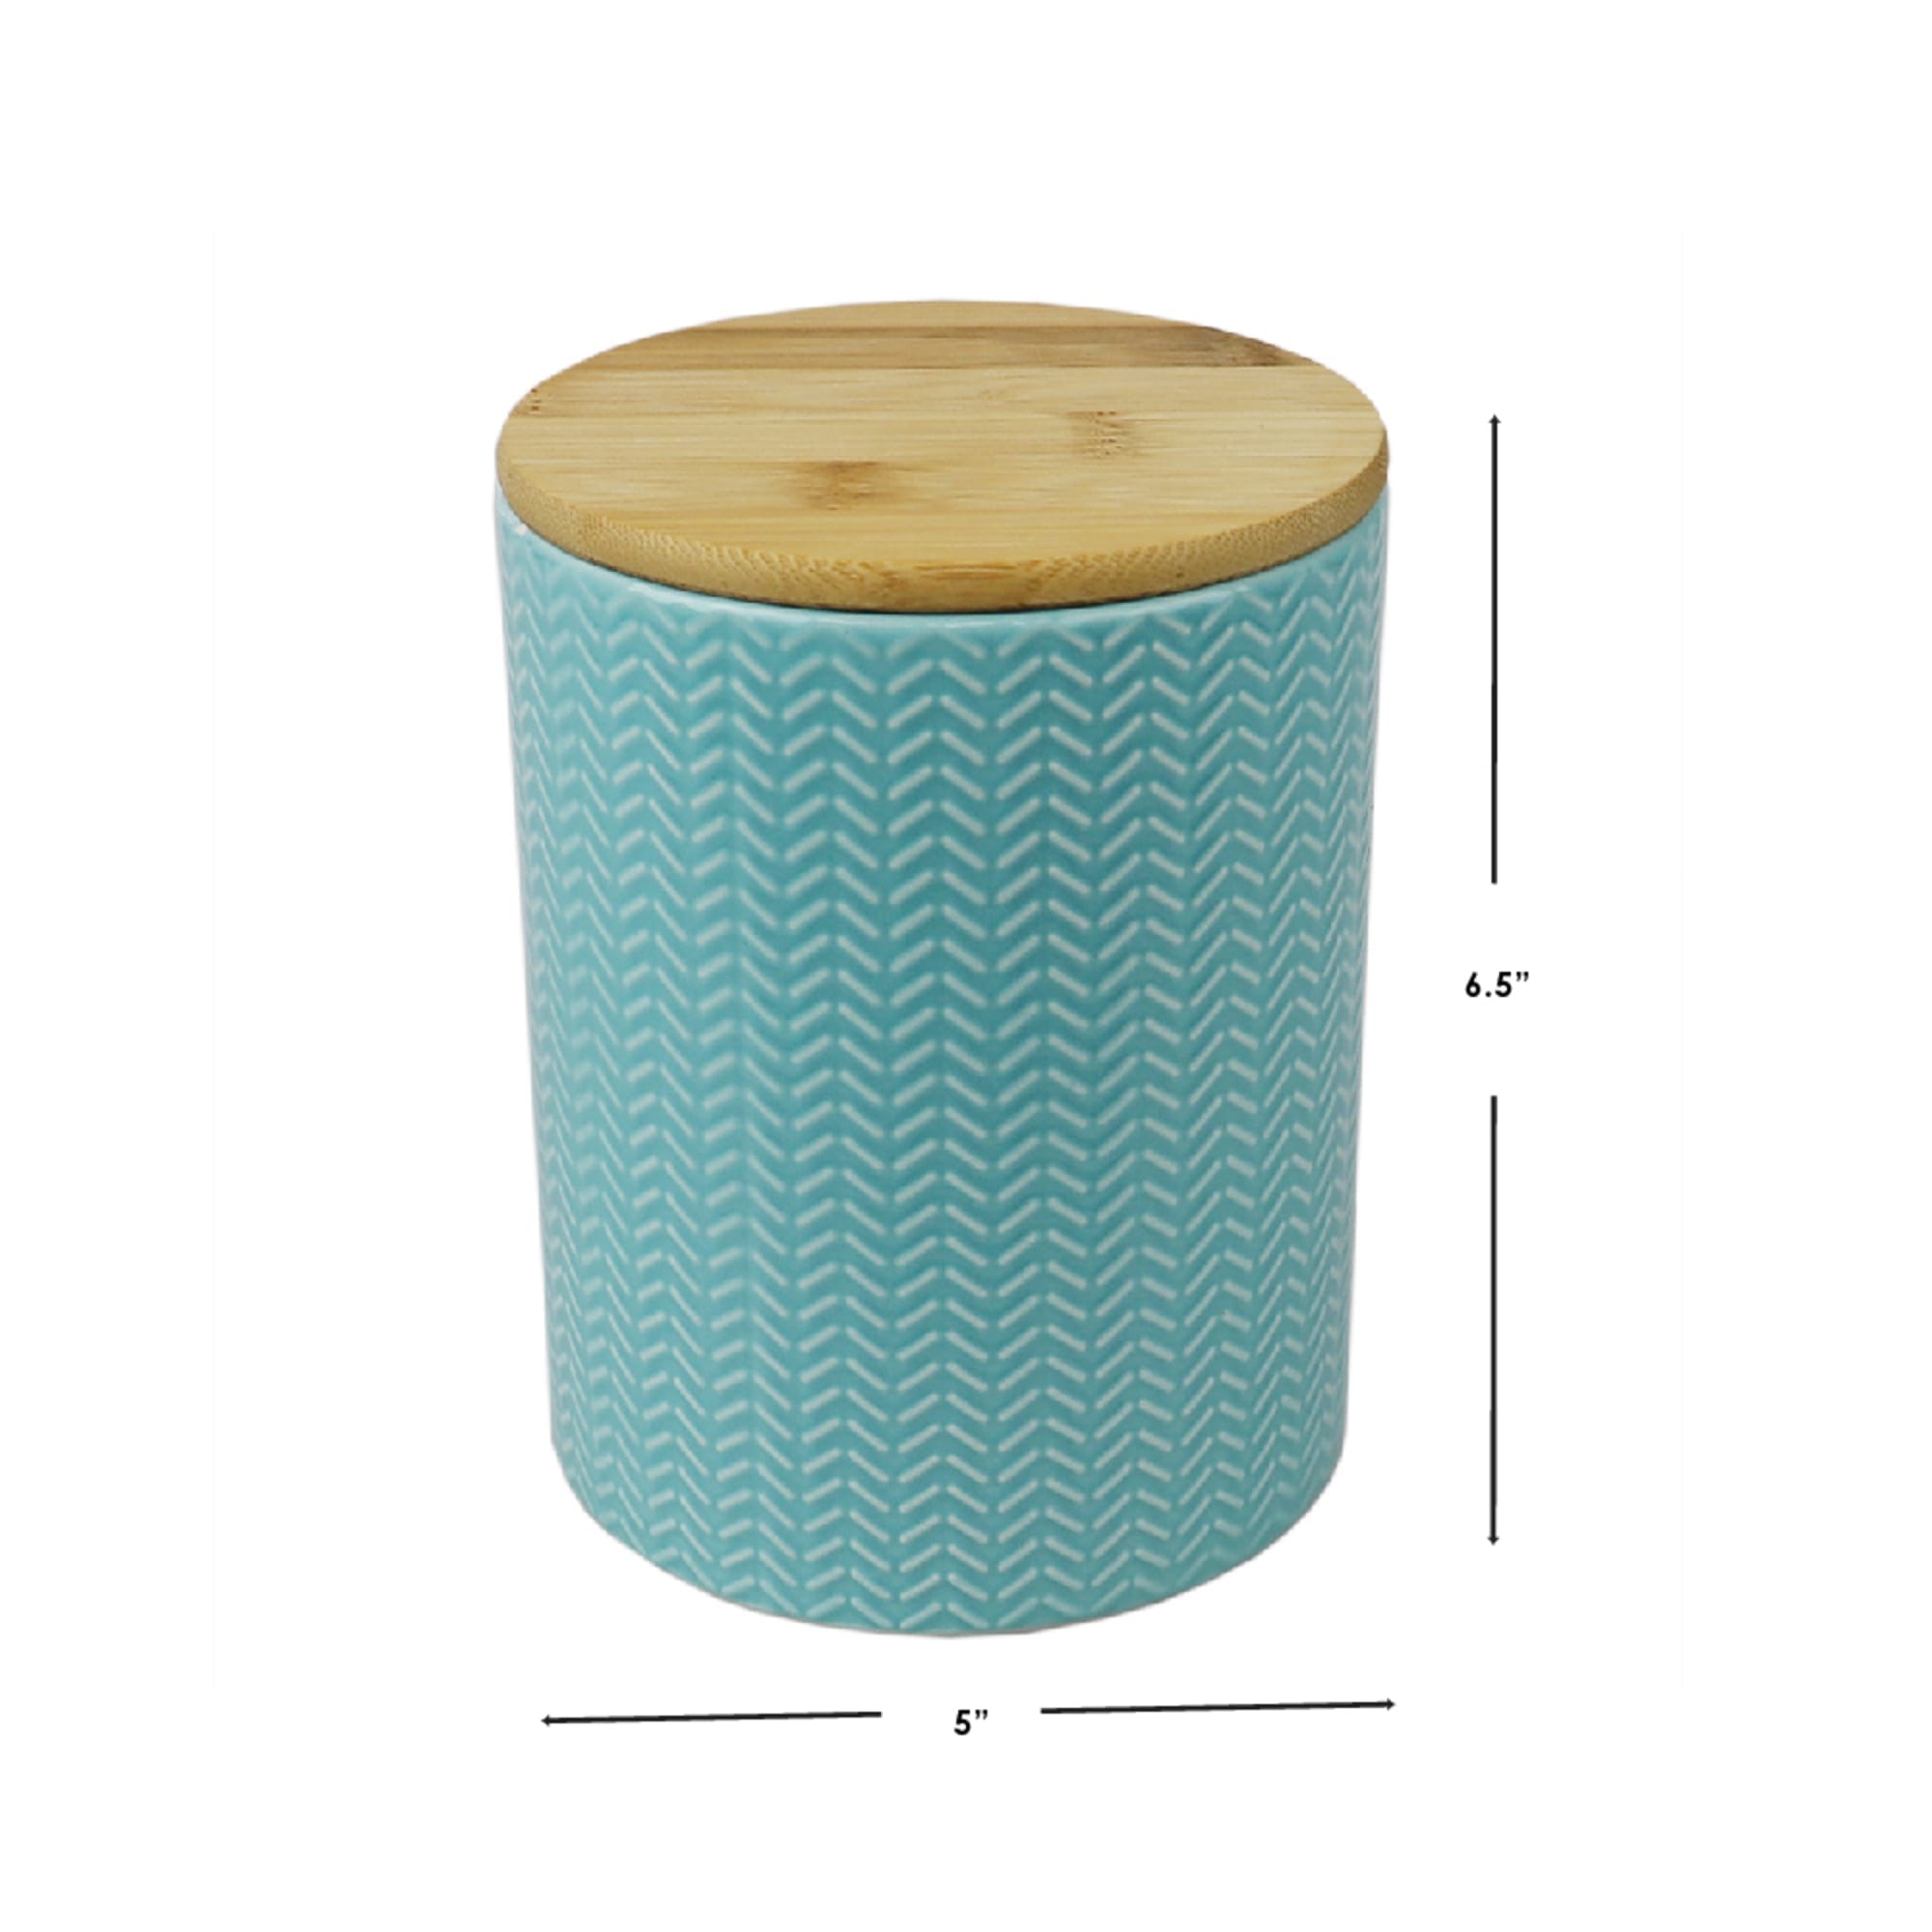 Home Basics Wave Medium Ceramic Canister, Turquoise $5.00 EACH, CASE PACK OF 12